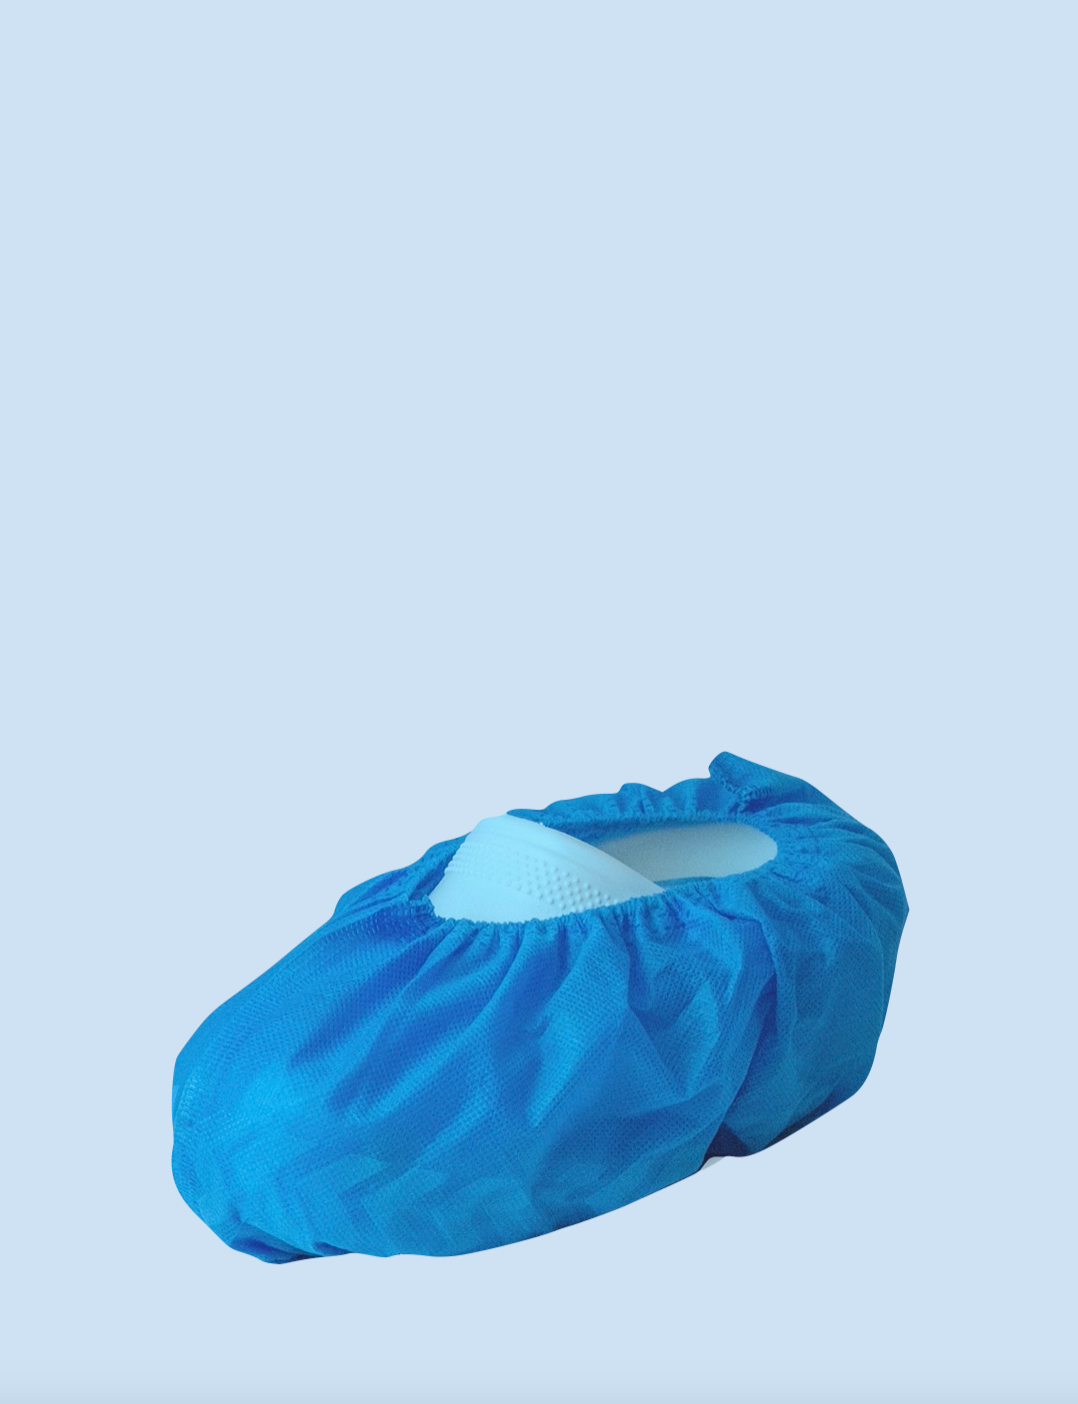 ShoozCovers™ Disposable Shoe Covers ($0.12 each)